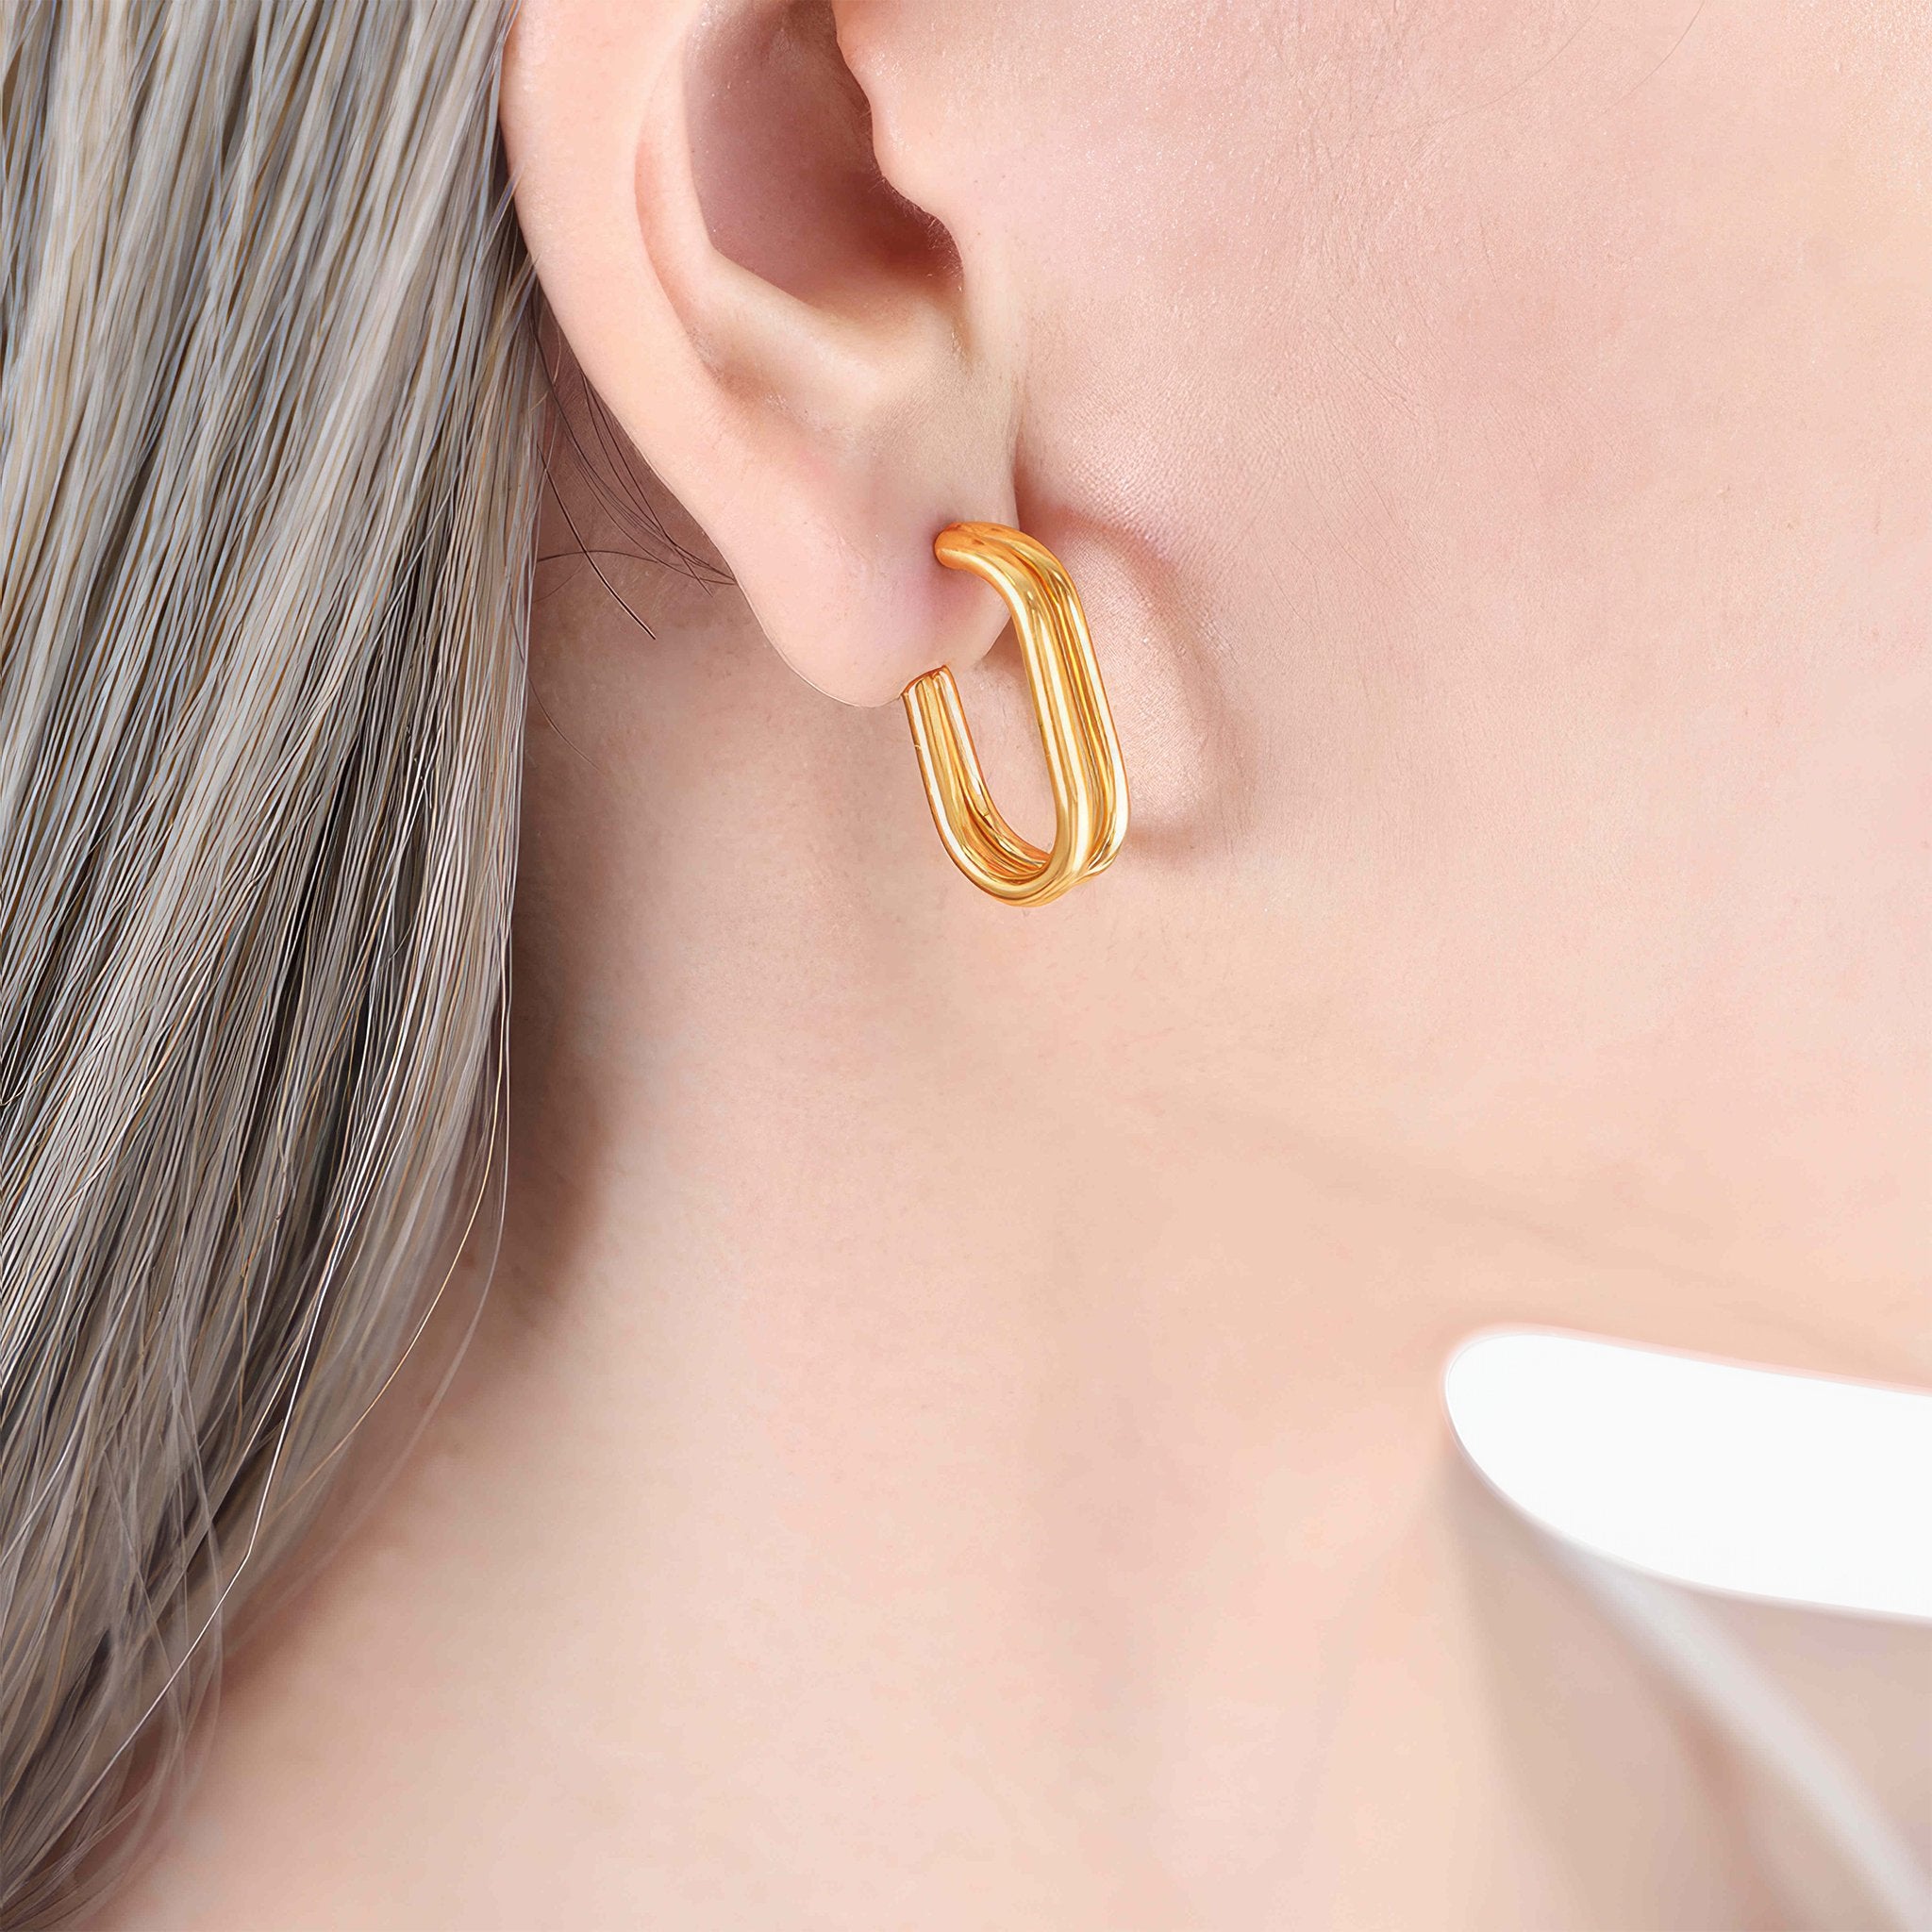 Exquisite Simple Oval Versatile Earrings - Nobbier - Earrings - 18K Gold And Titanium PVD Coated Jewelry